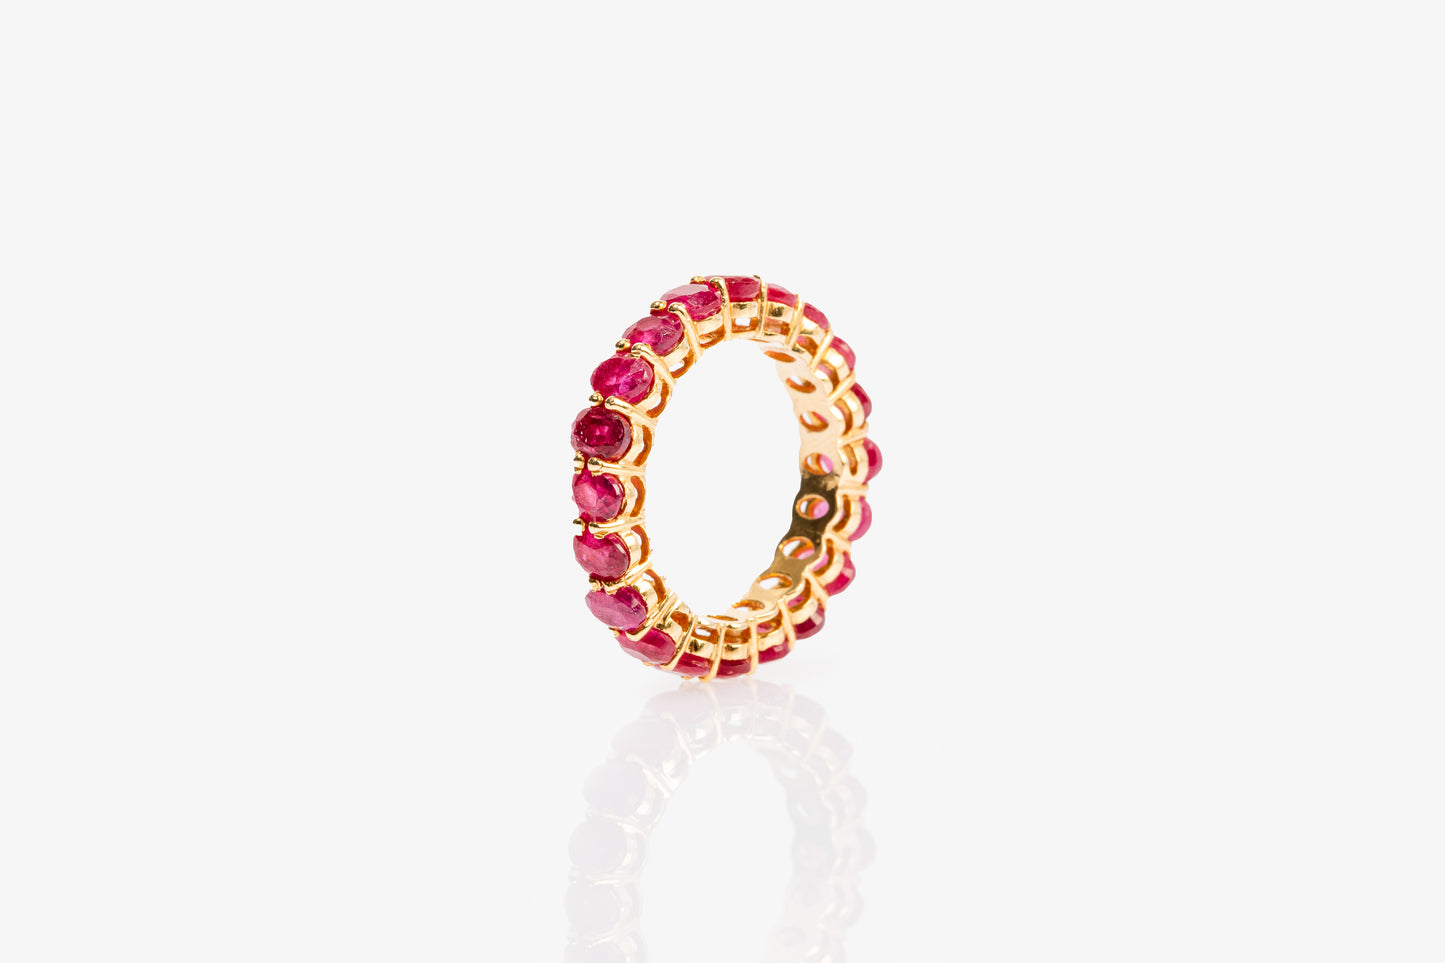 Ruby Oval Eternity Band